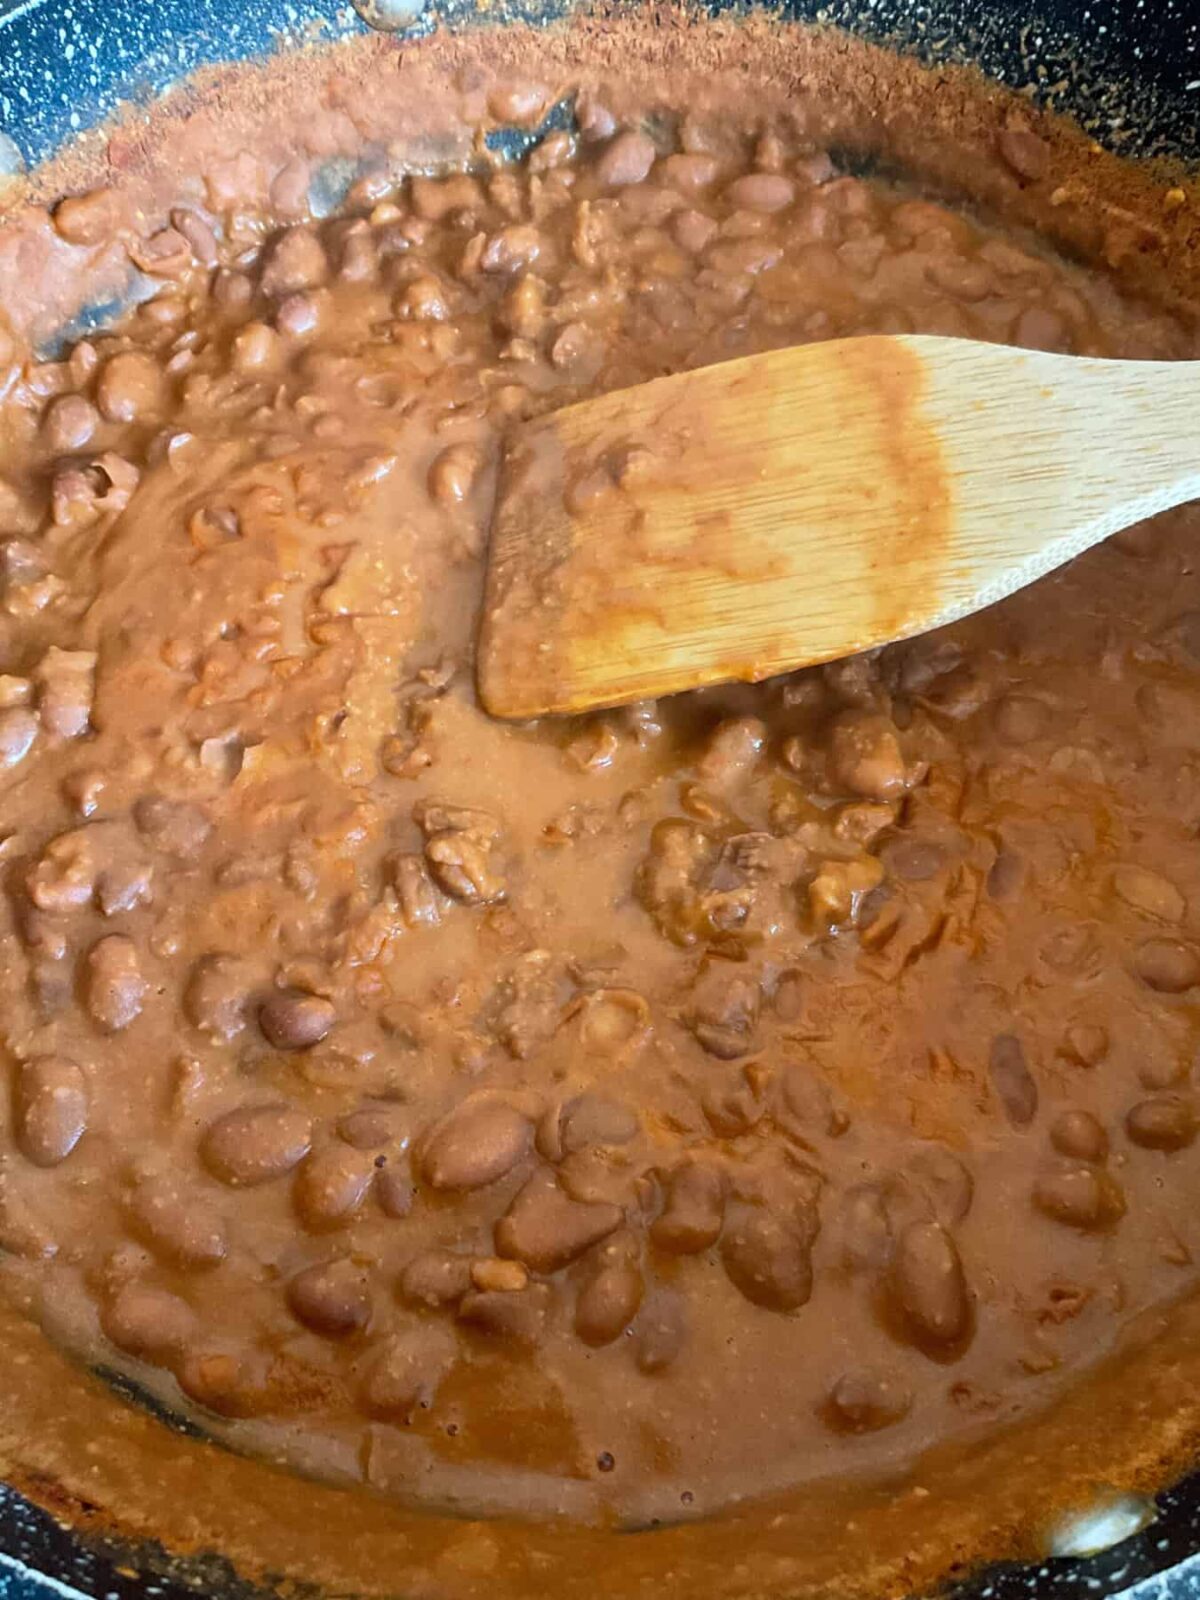 Refried beans cooked in the pan and ready to serve.